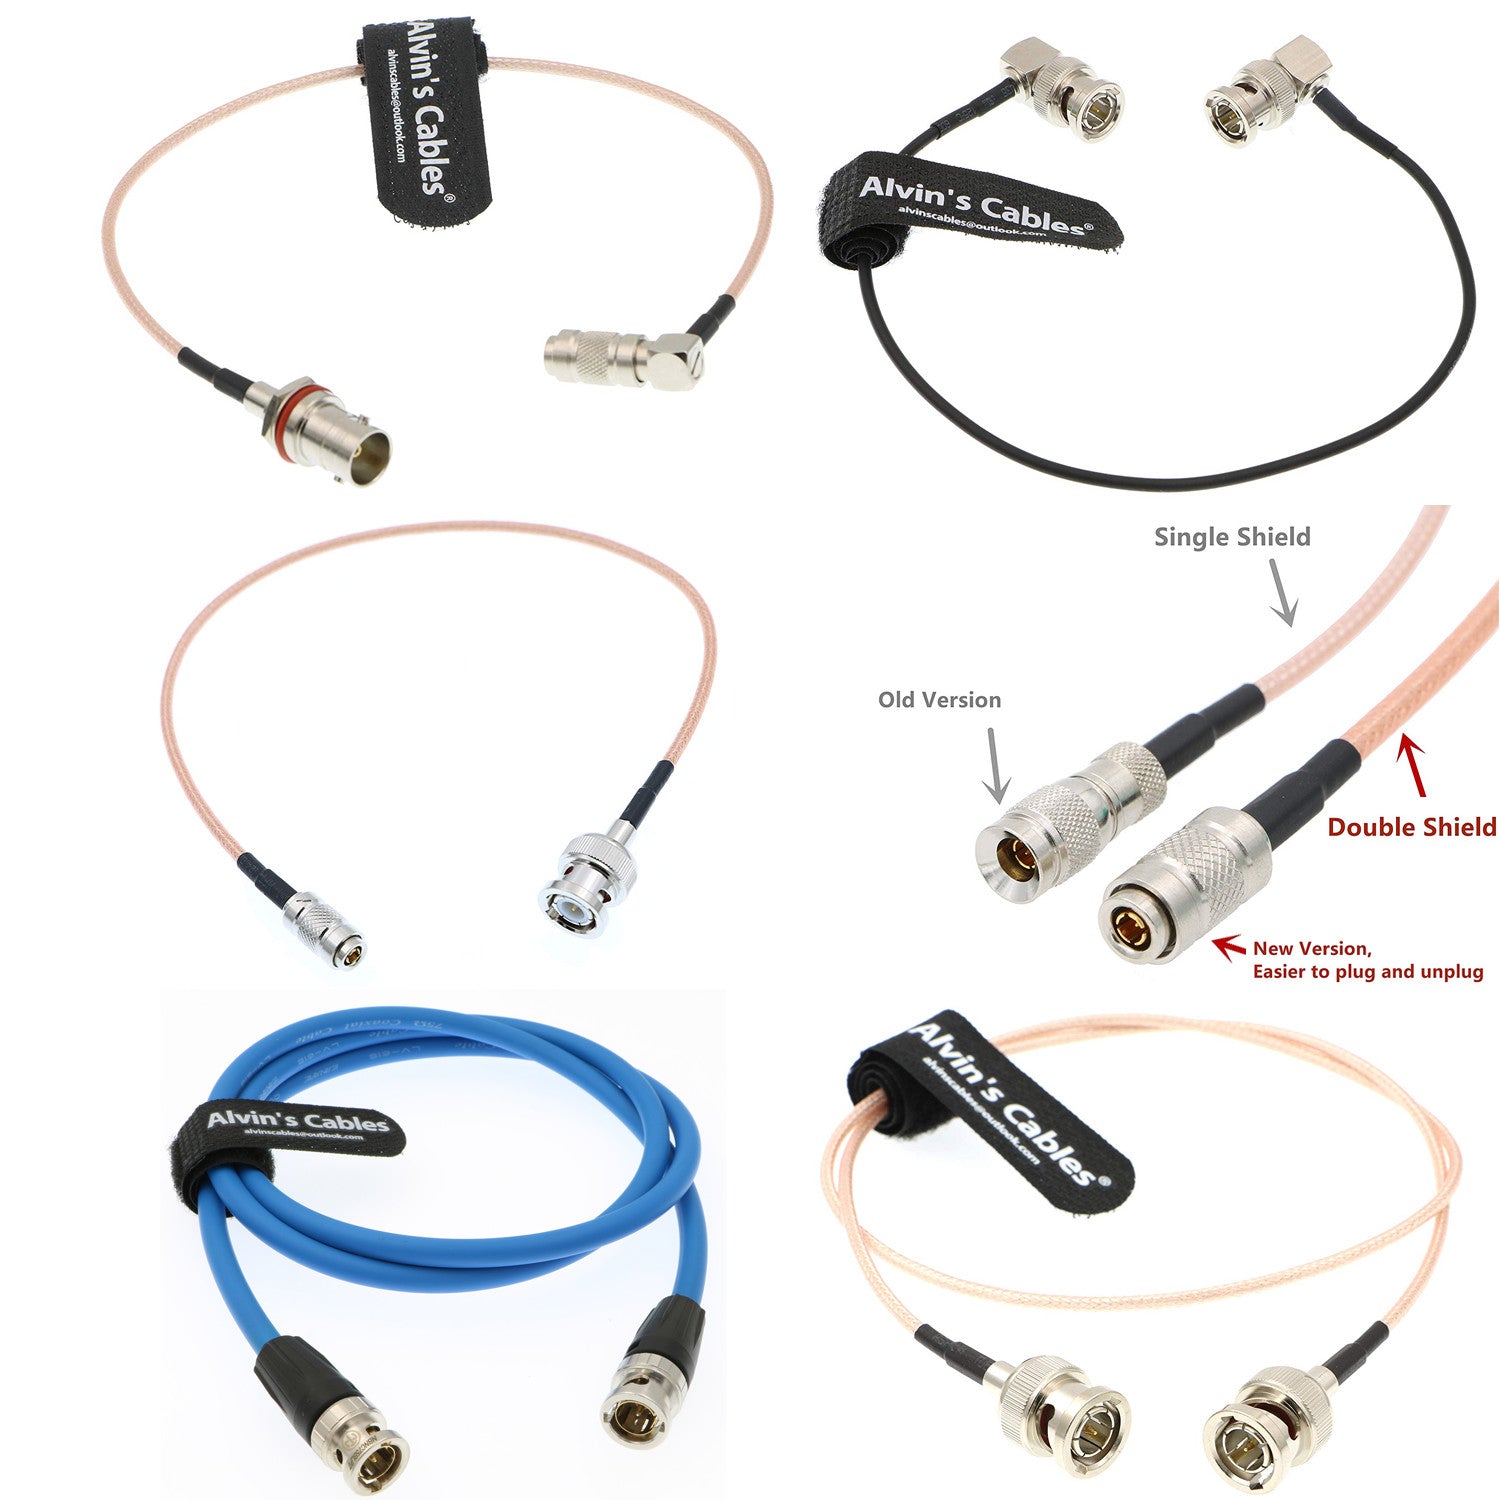 Customize Cables in Alvin's Cables Contact Us For More Types and Length